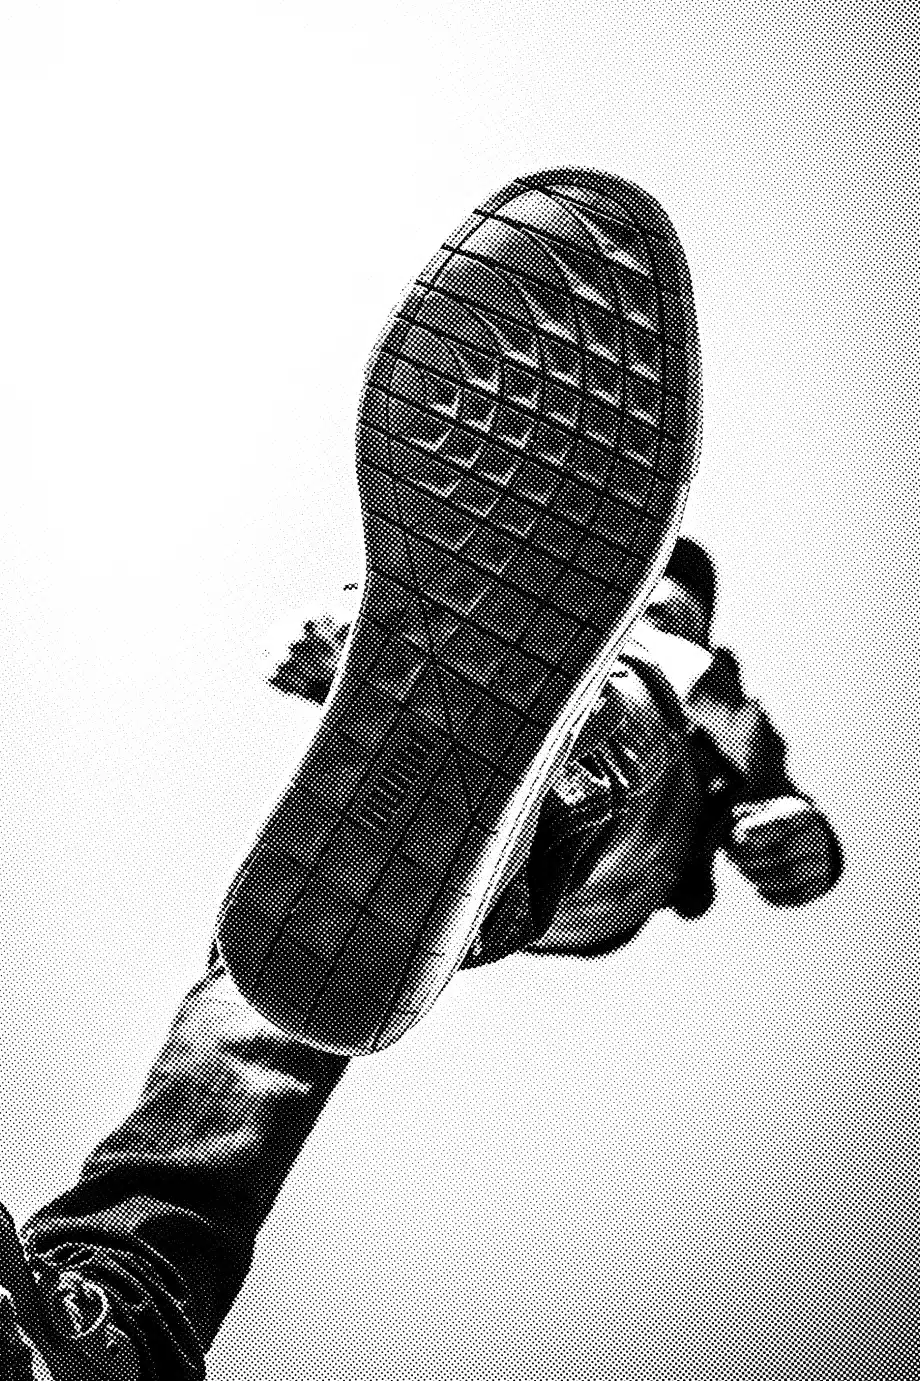 A black-and-white image of a close-up of the bottom tread of a branded sneaker. The shoe is in focus and appears to be worn by someone who is either jumping or stepping forward, with the sky in the background. The tread pattern is clearly visible.